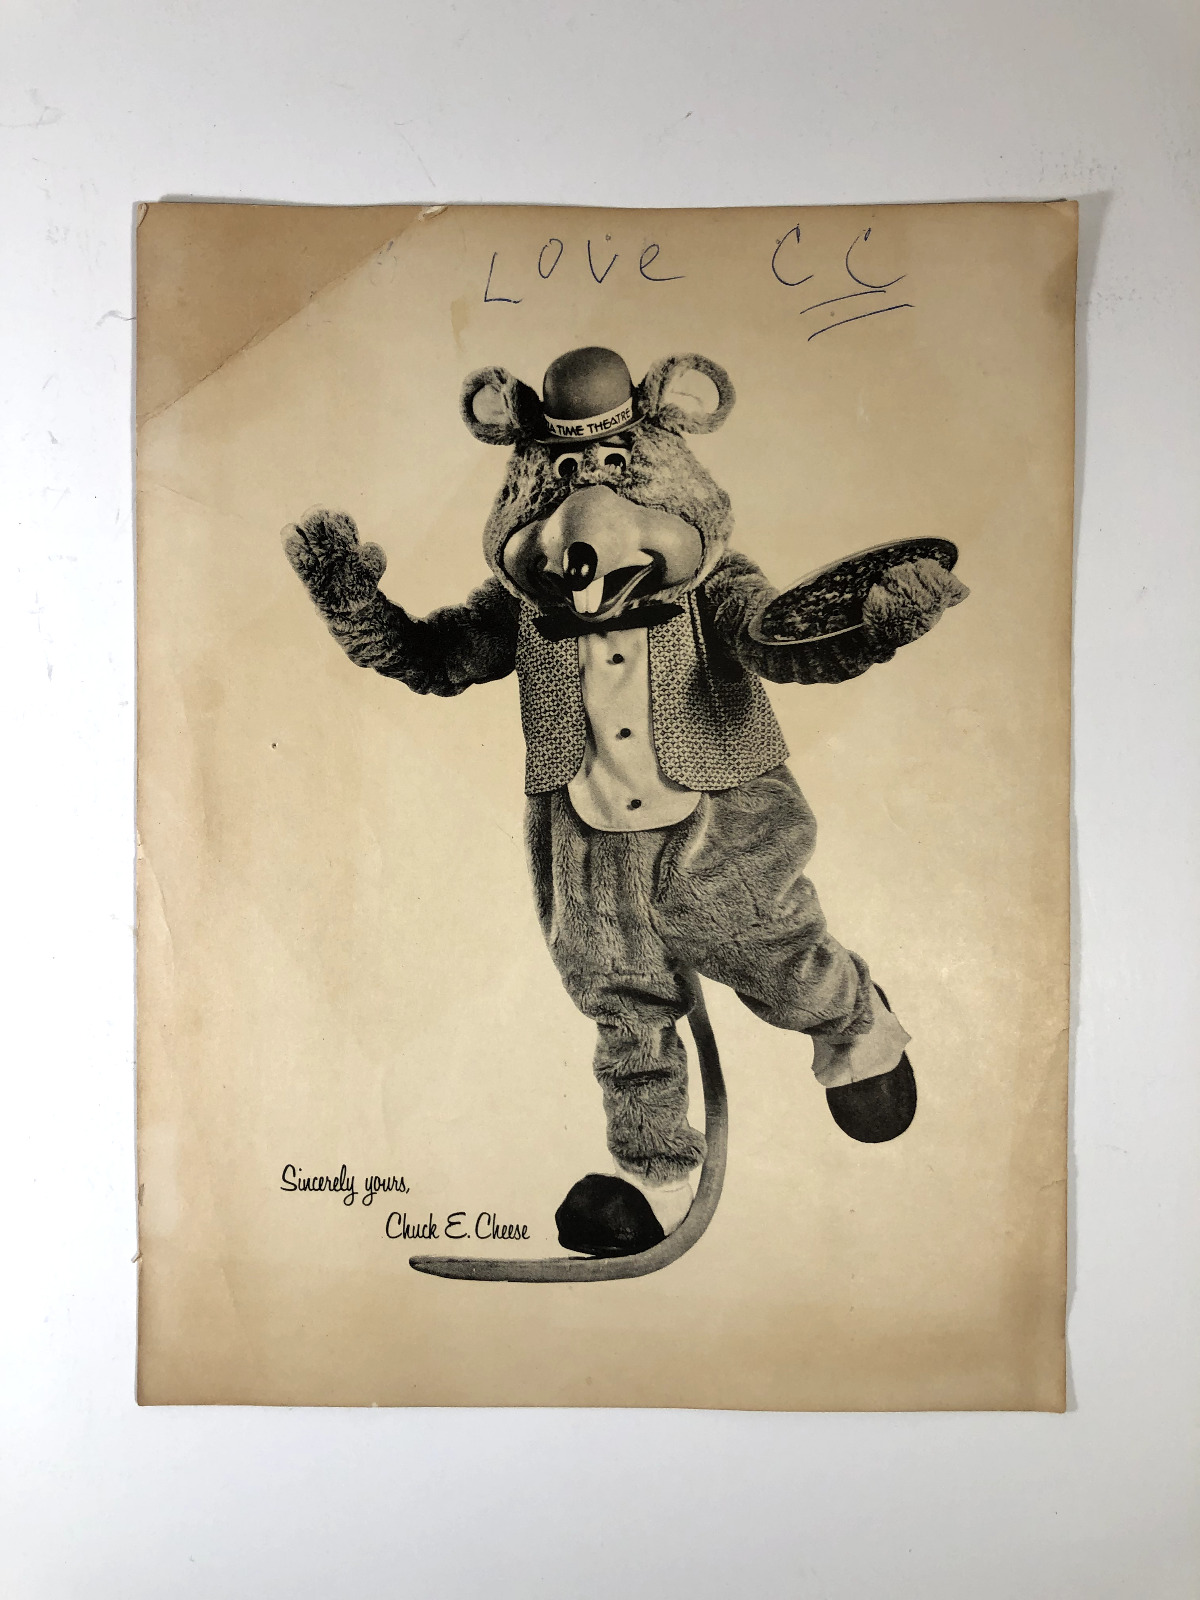 Vintage 1982 Chuck E Cheese Promo Photo- Signed by the Guy in the Costume lol